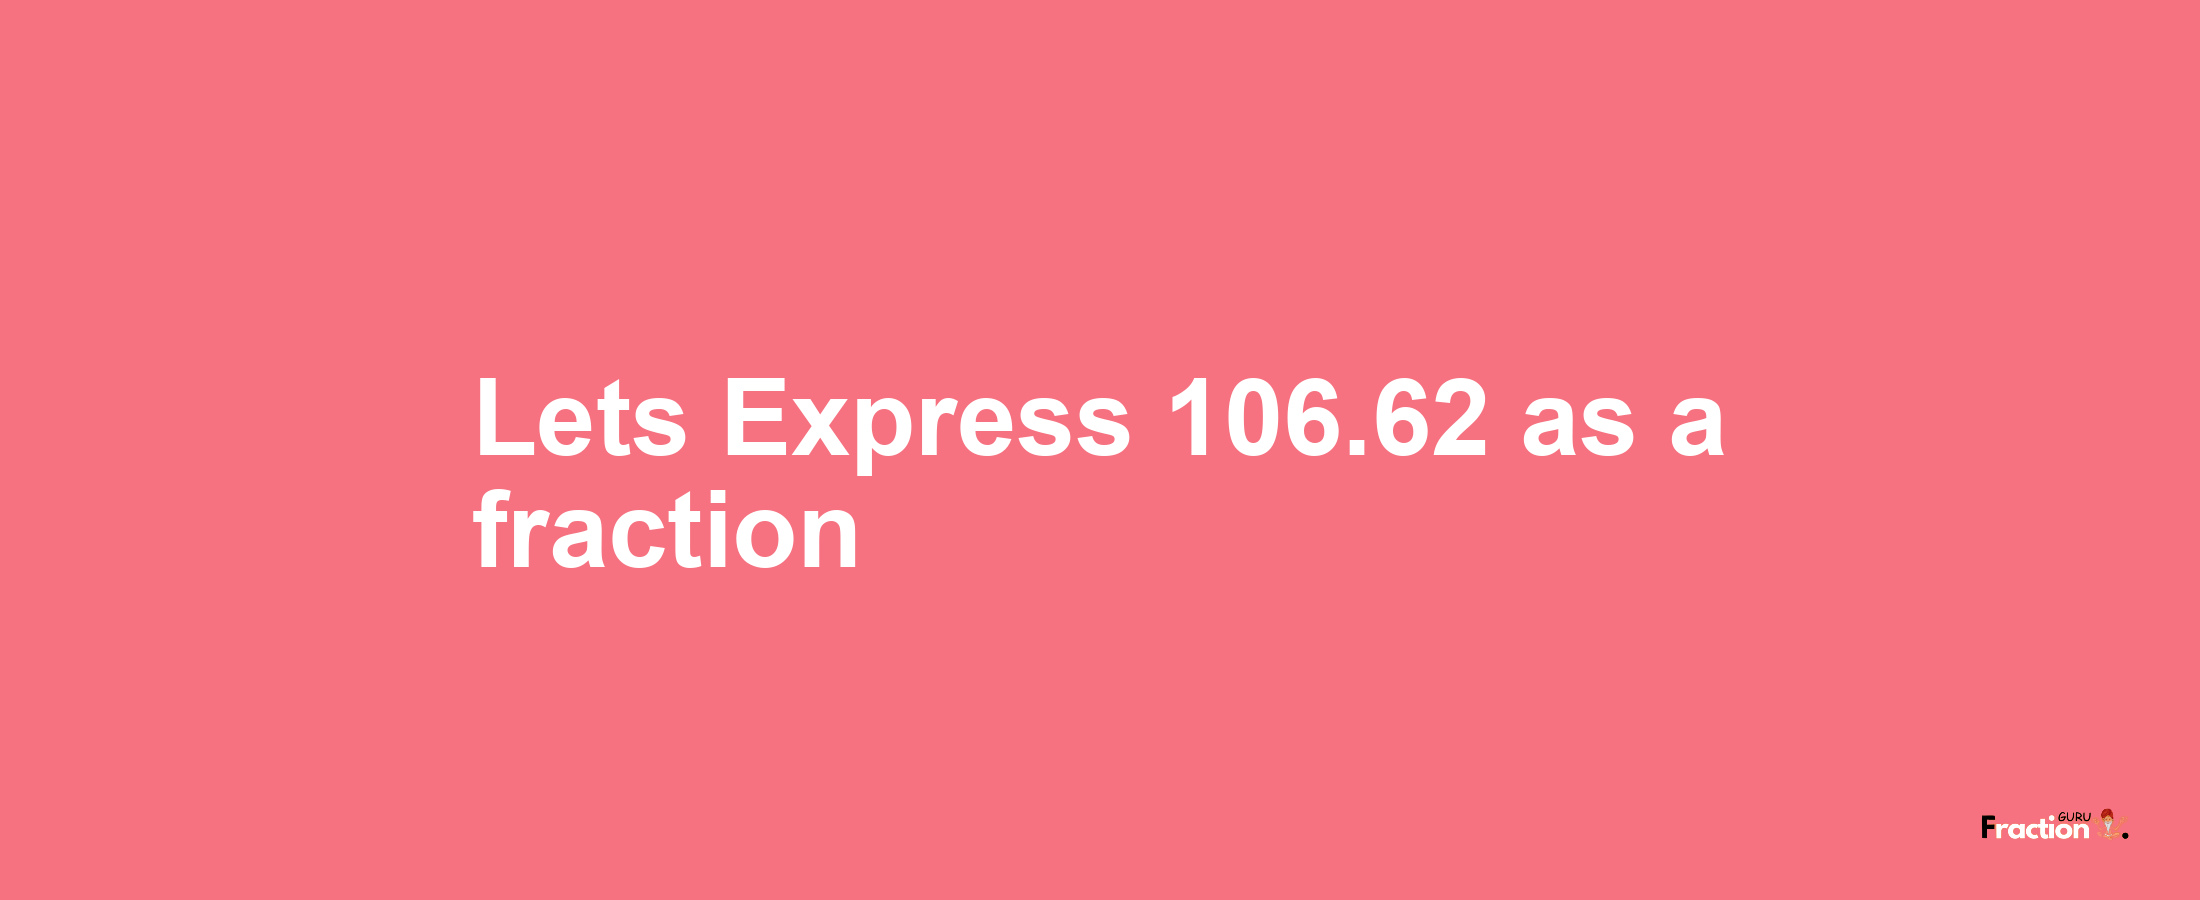 Lets Express 106.62 as afraction